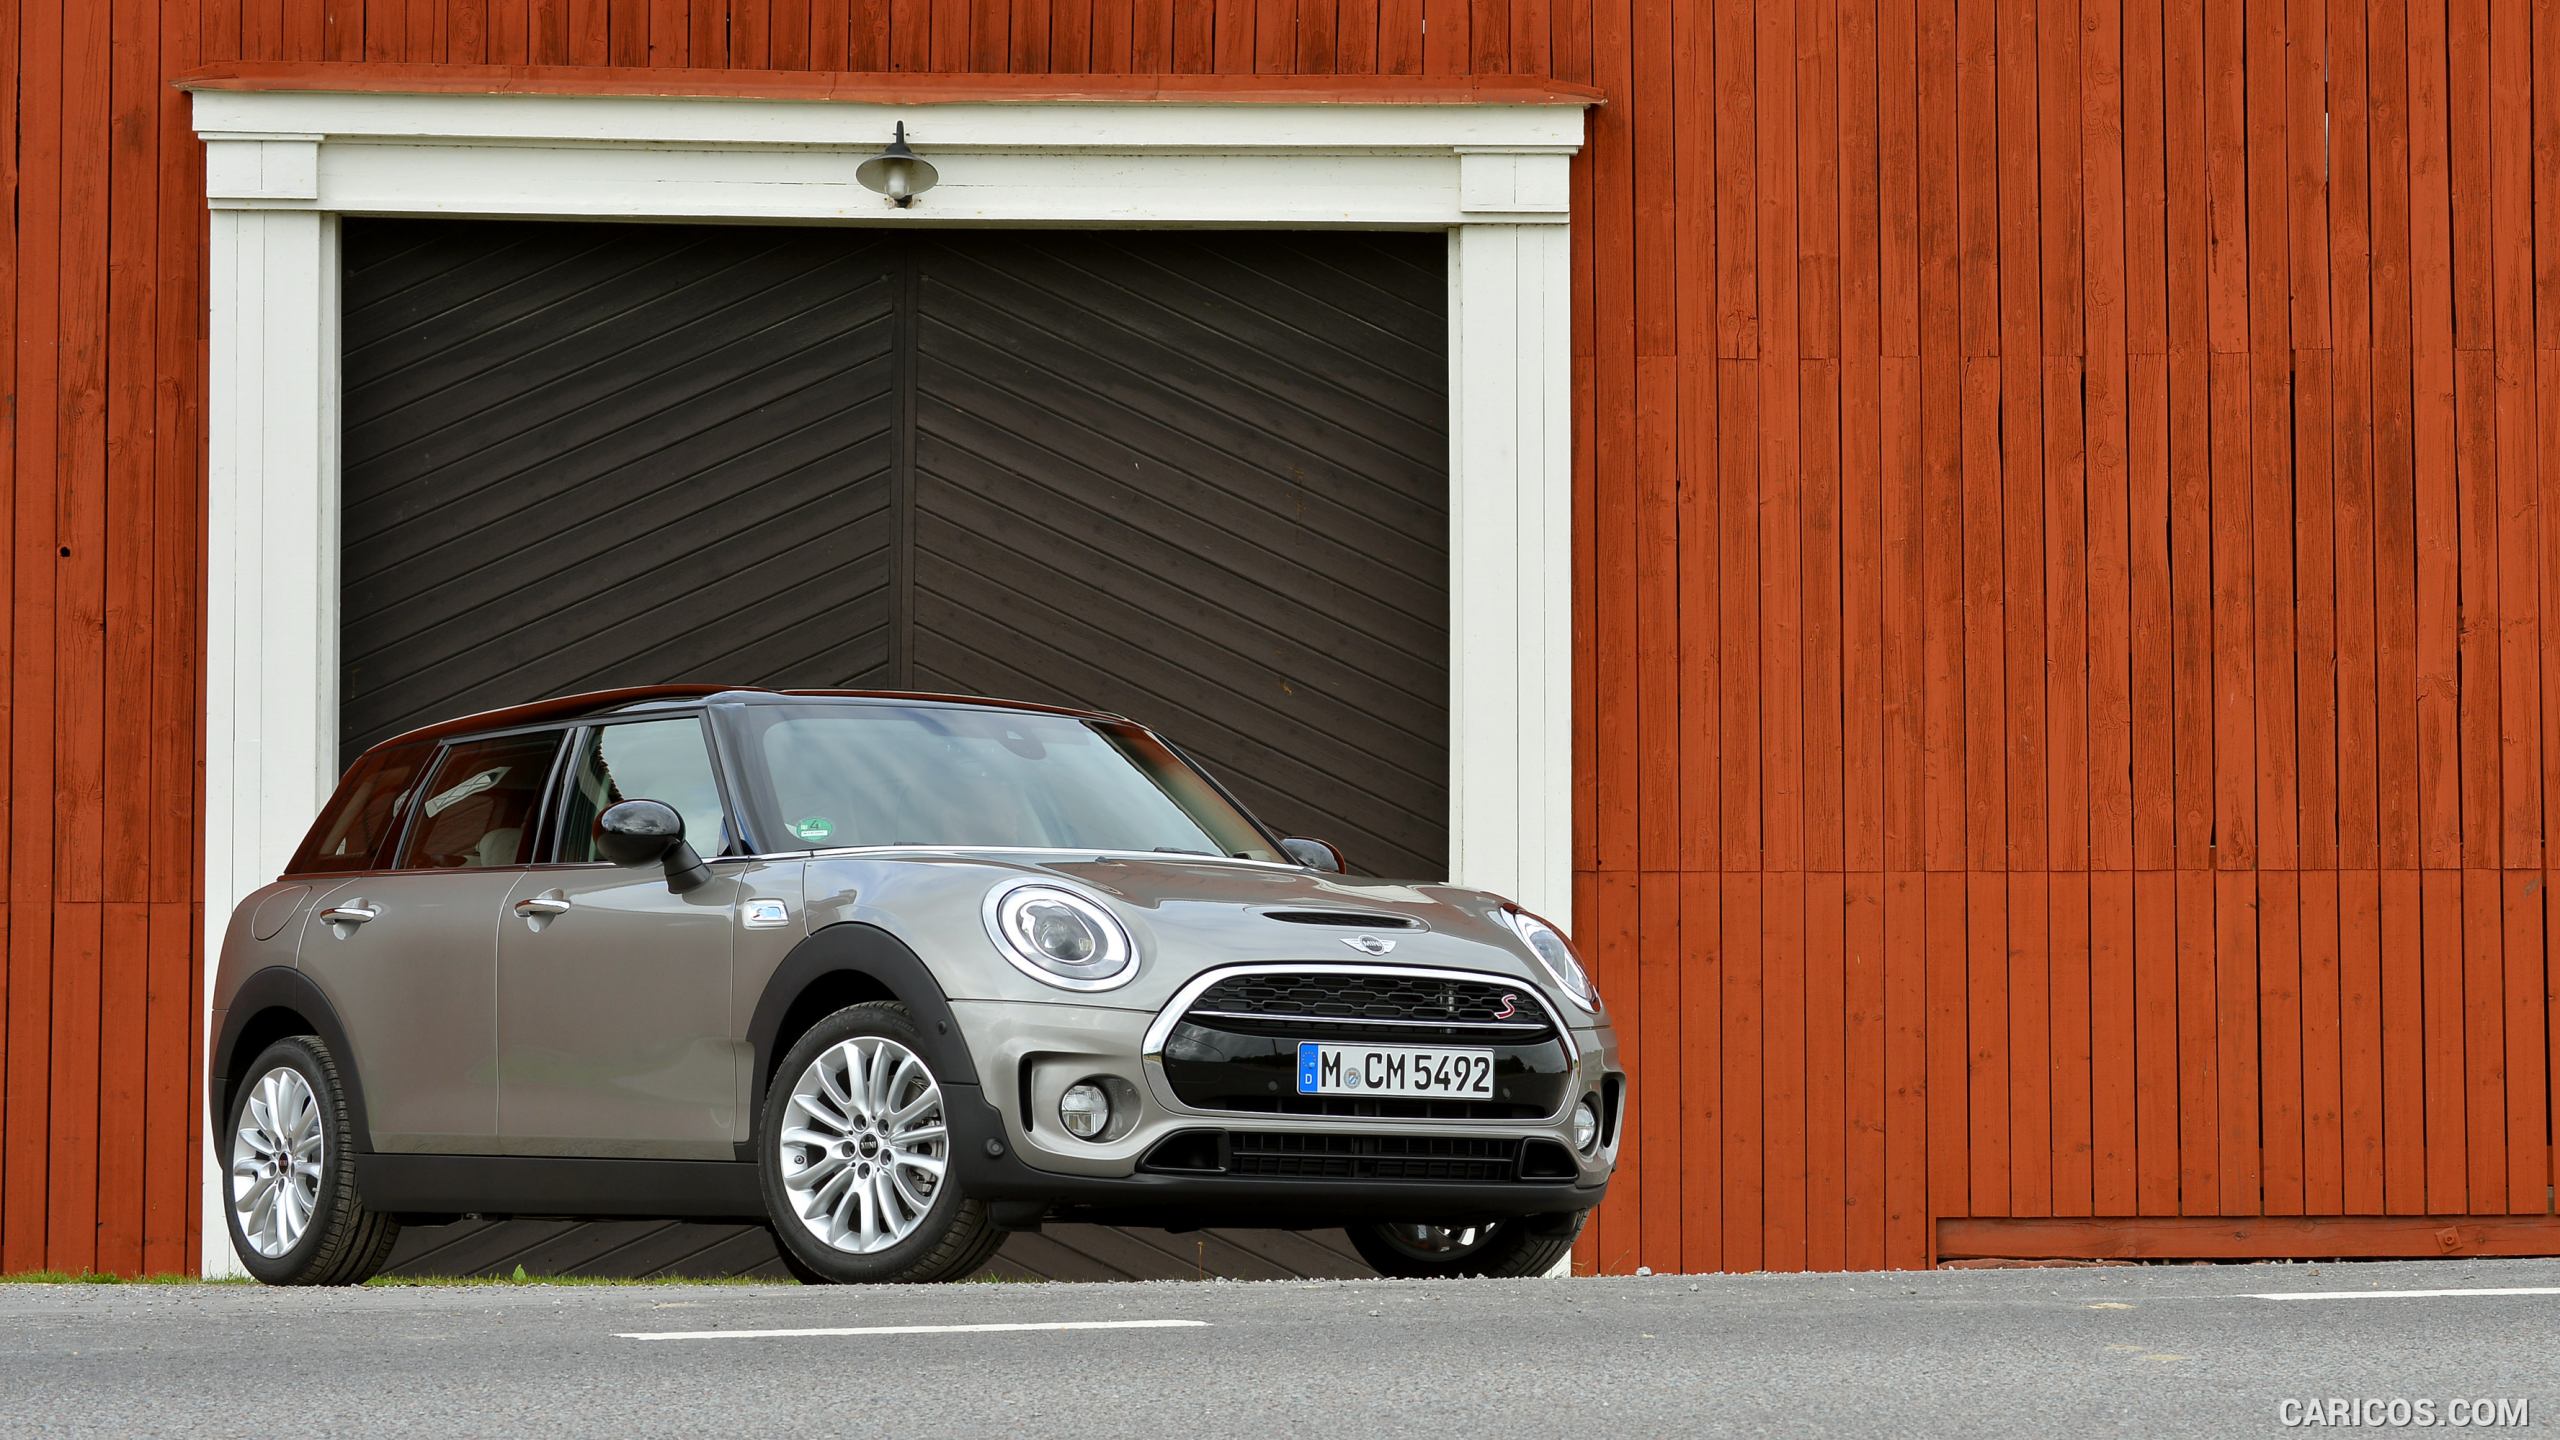 2016 MINI Cooper S Clubman in Metallic Melting Silver - Front, #198 of 380